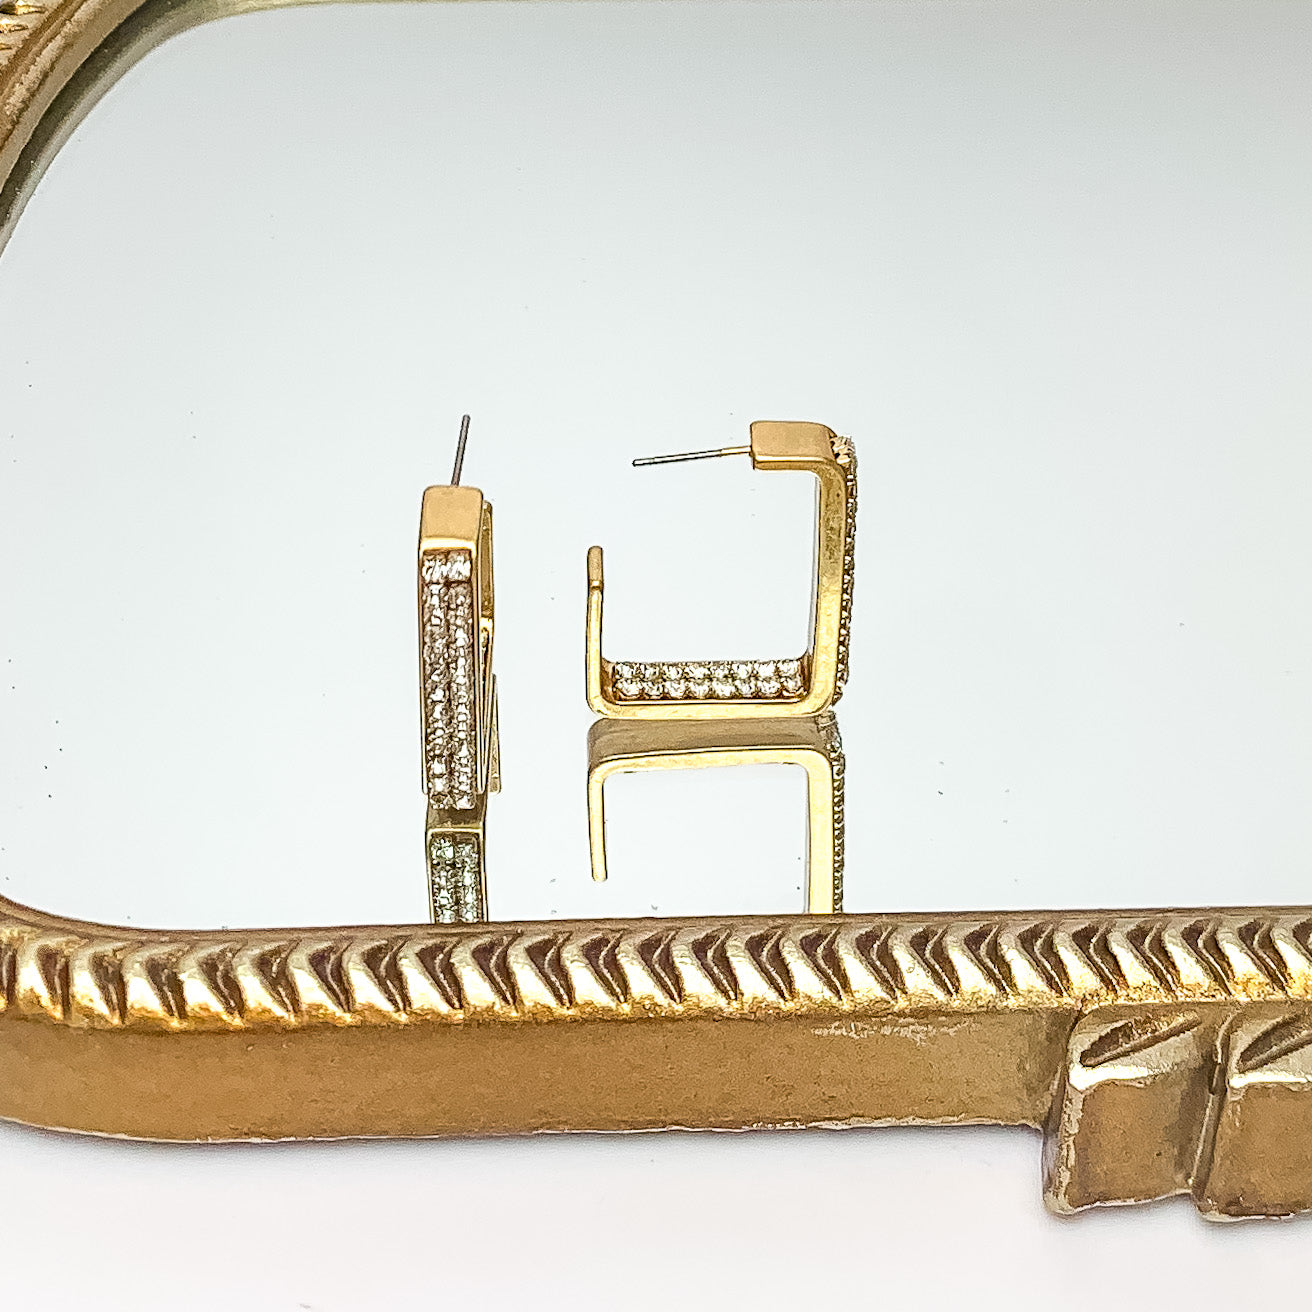 Gold Tone Rectangle Hoop Earrings With Clear Crystal Inlay. Pictured on a mirror with a gold trim.